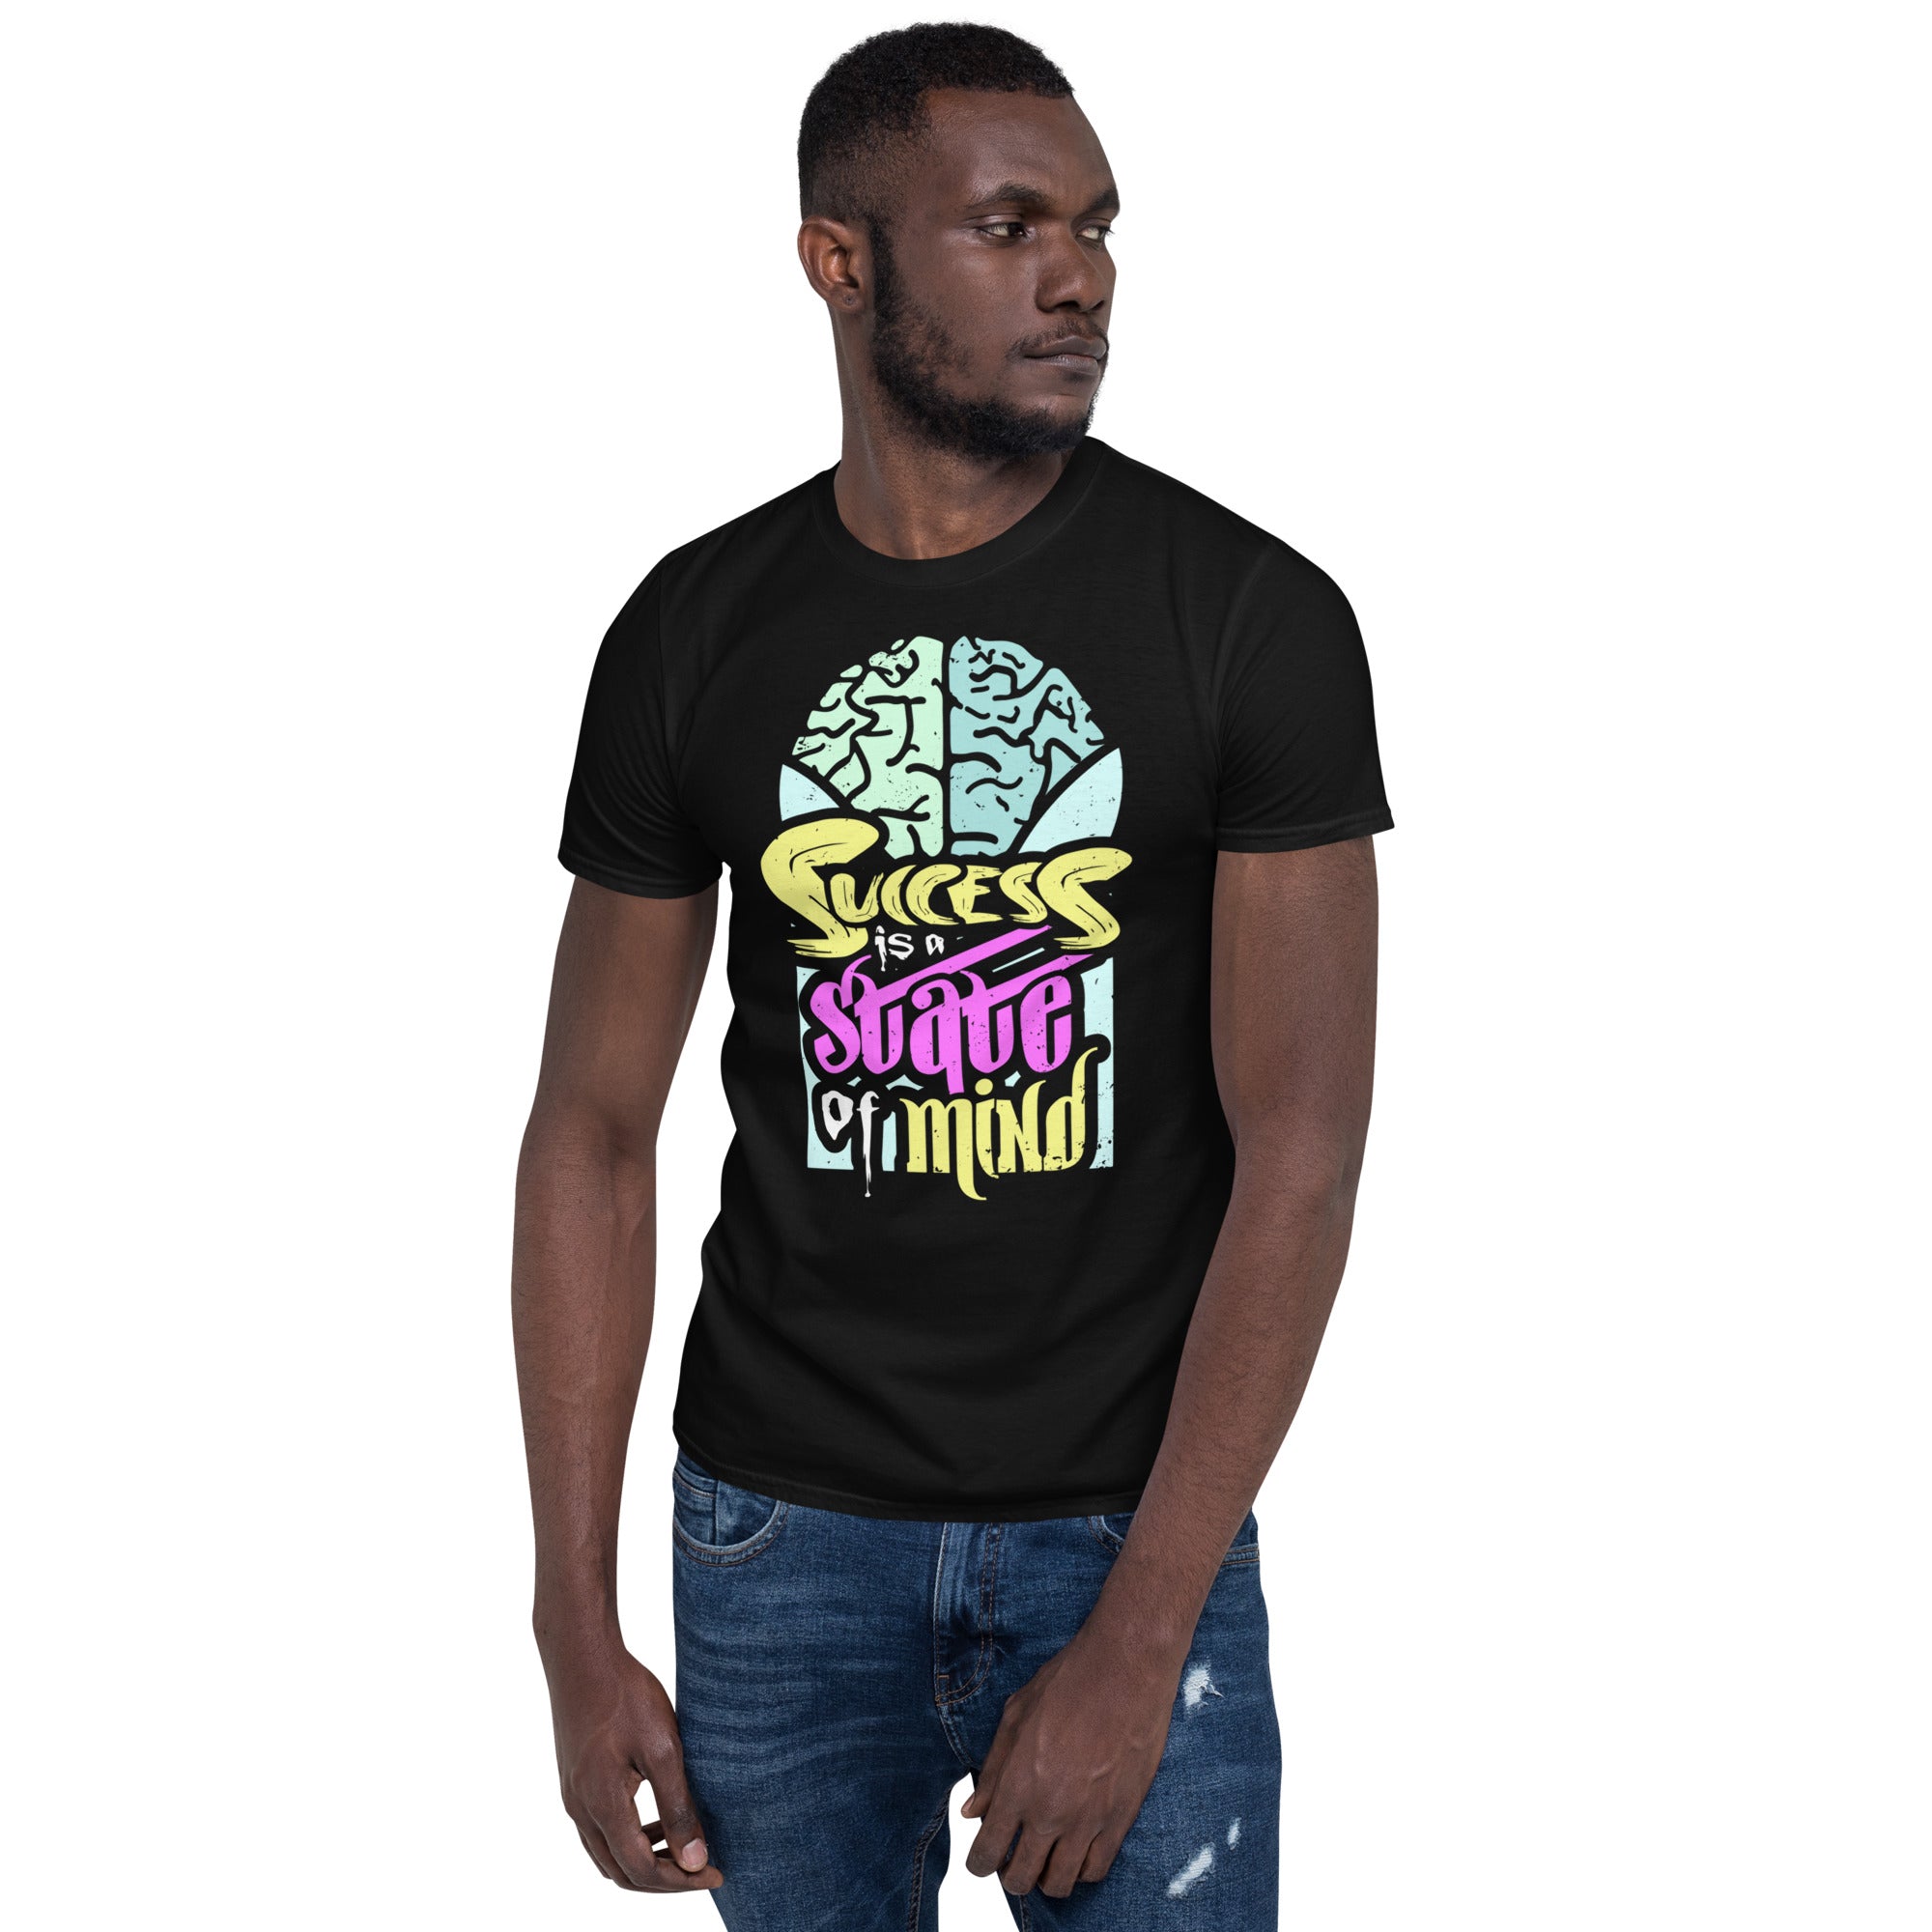 Success Is A State of Mind - Short-Sleeve Unisex T-Shirt